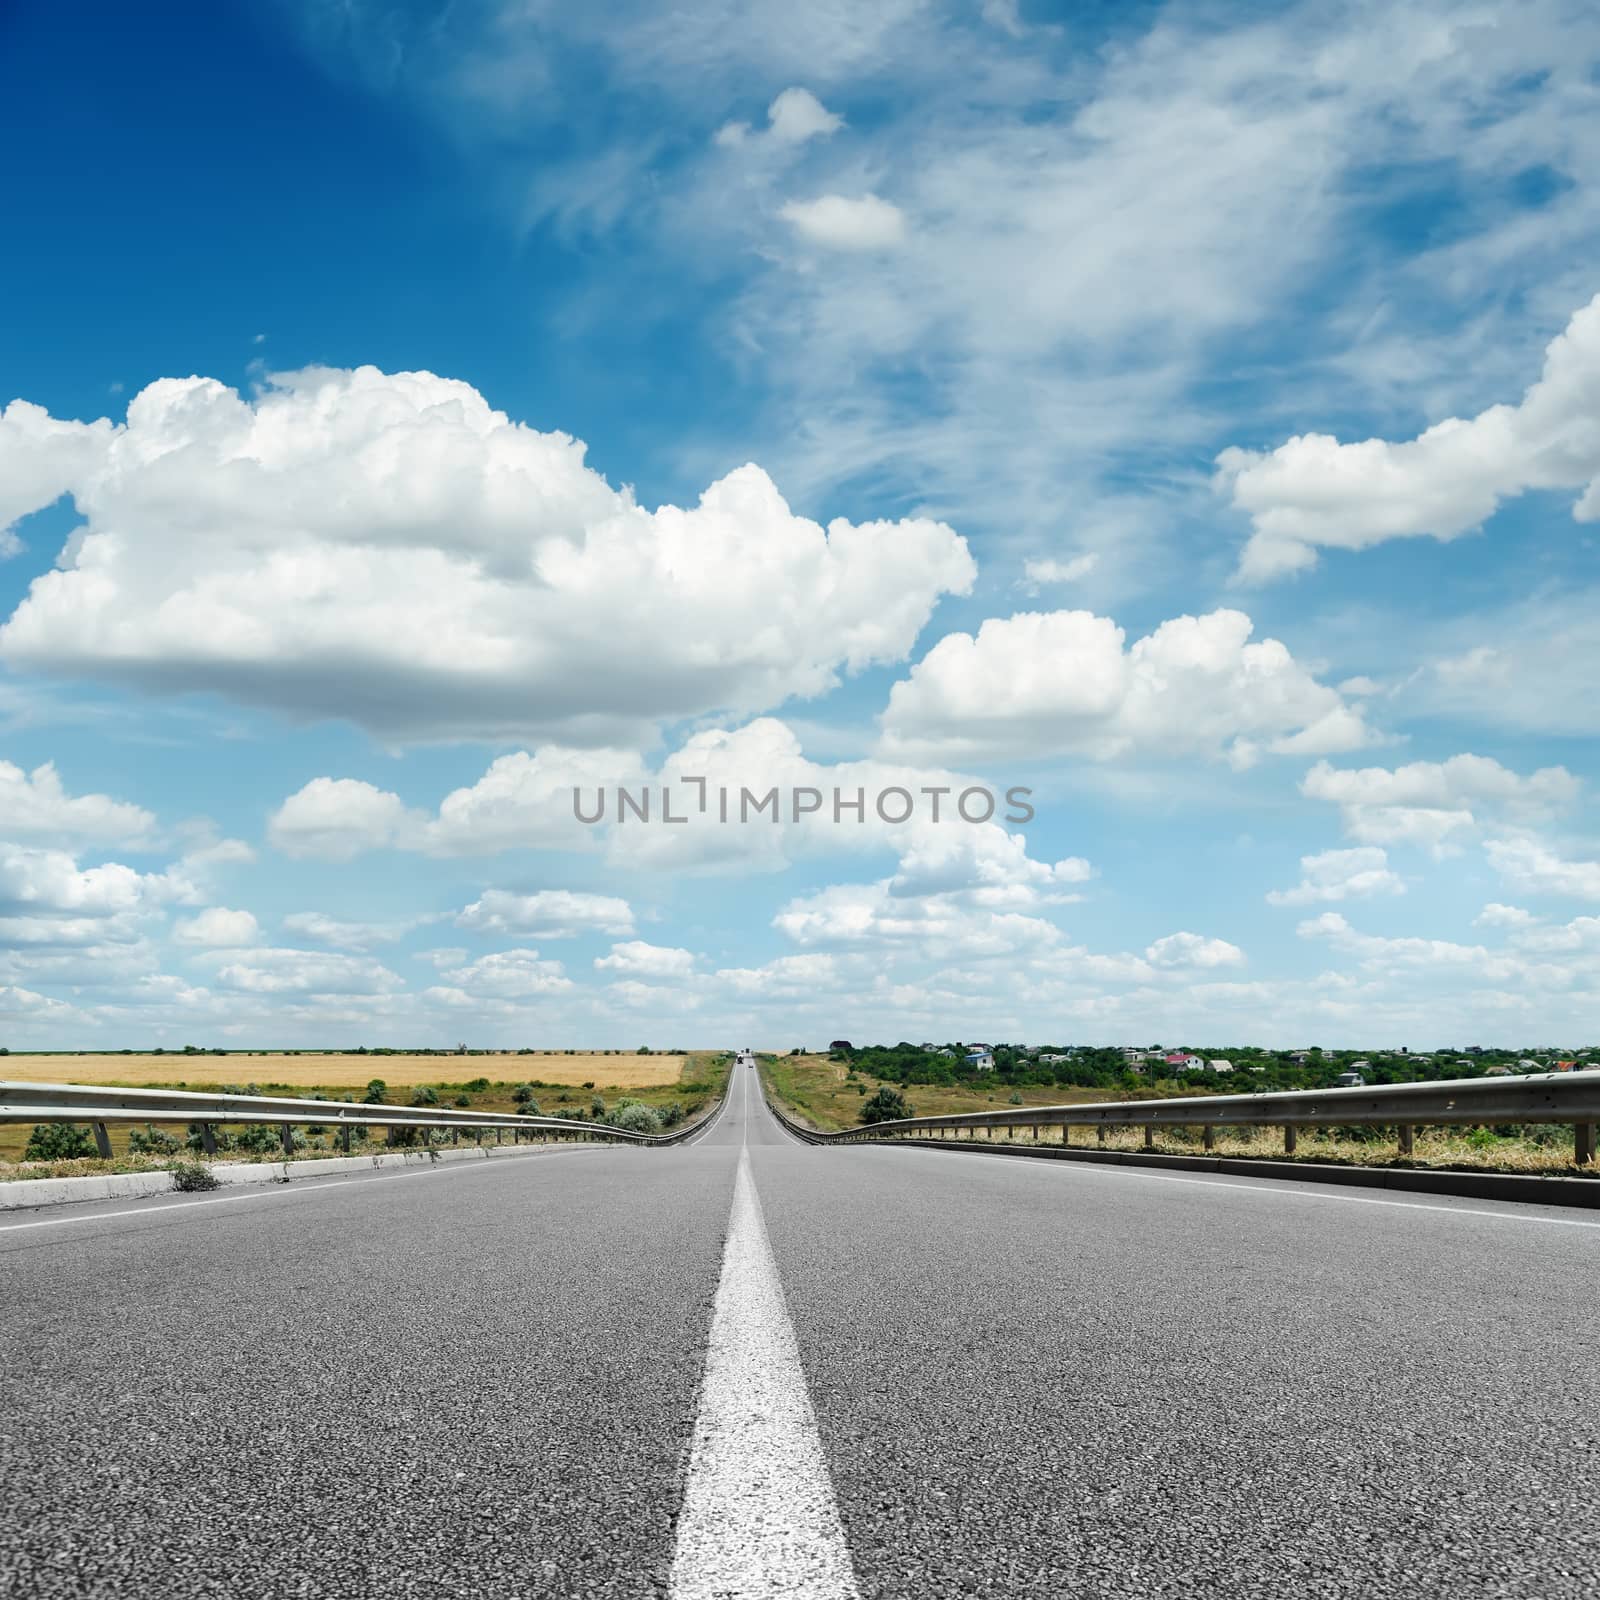 asphalt road with white line on center close up under cloudy sky by mycola